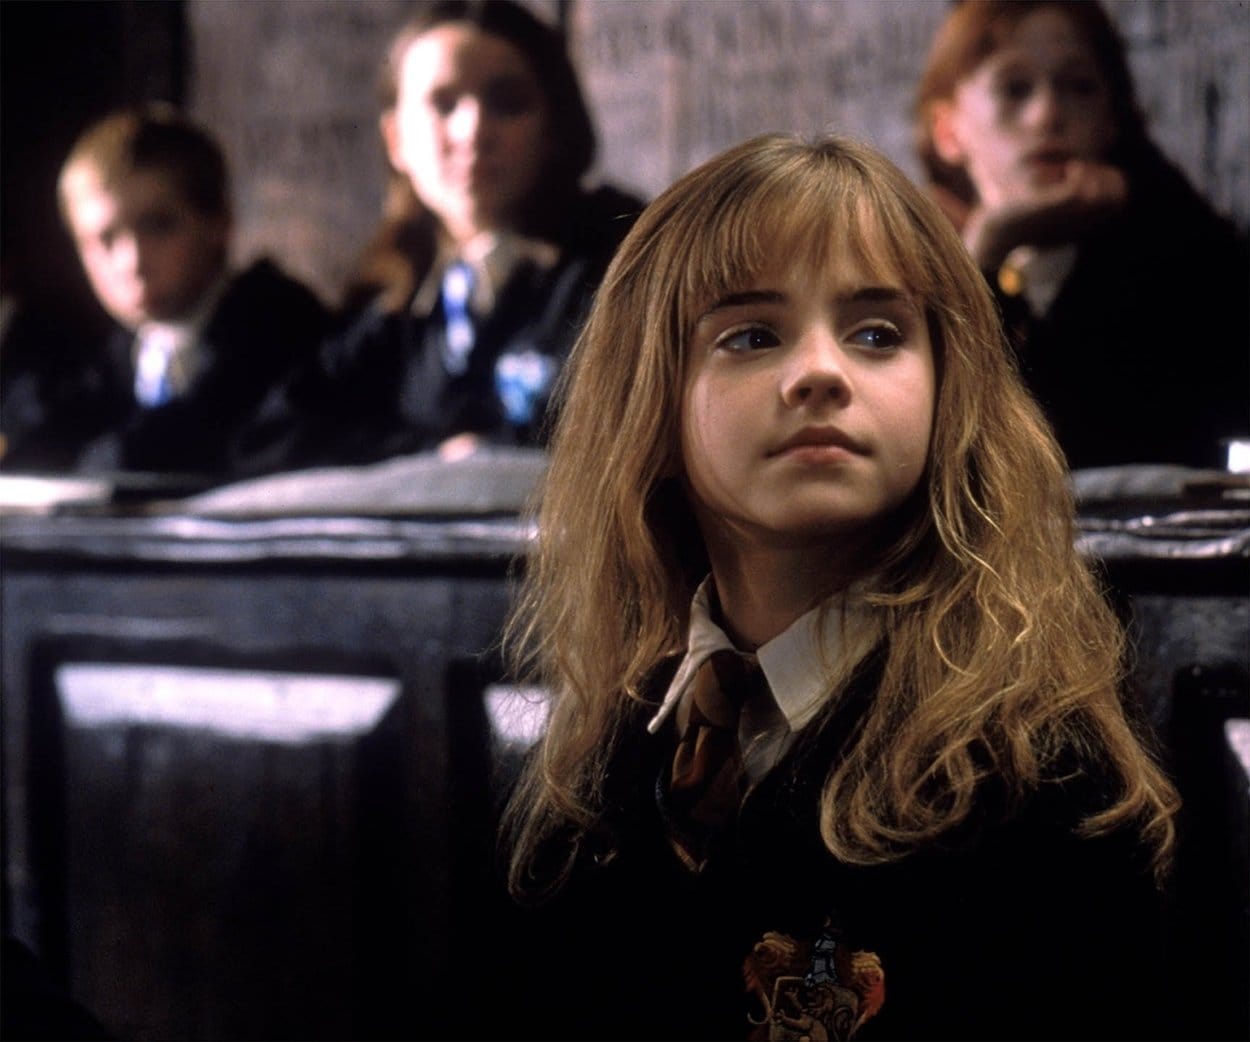 Emma Charlotte Duerre Watson was 11 years old when Harry Potter and the Philosopher's Stone was released in November 2001